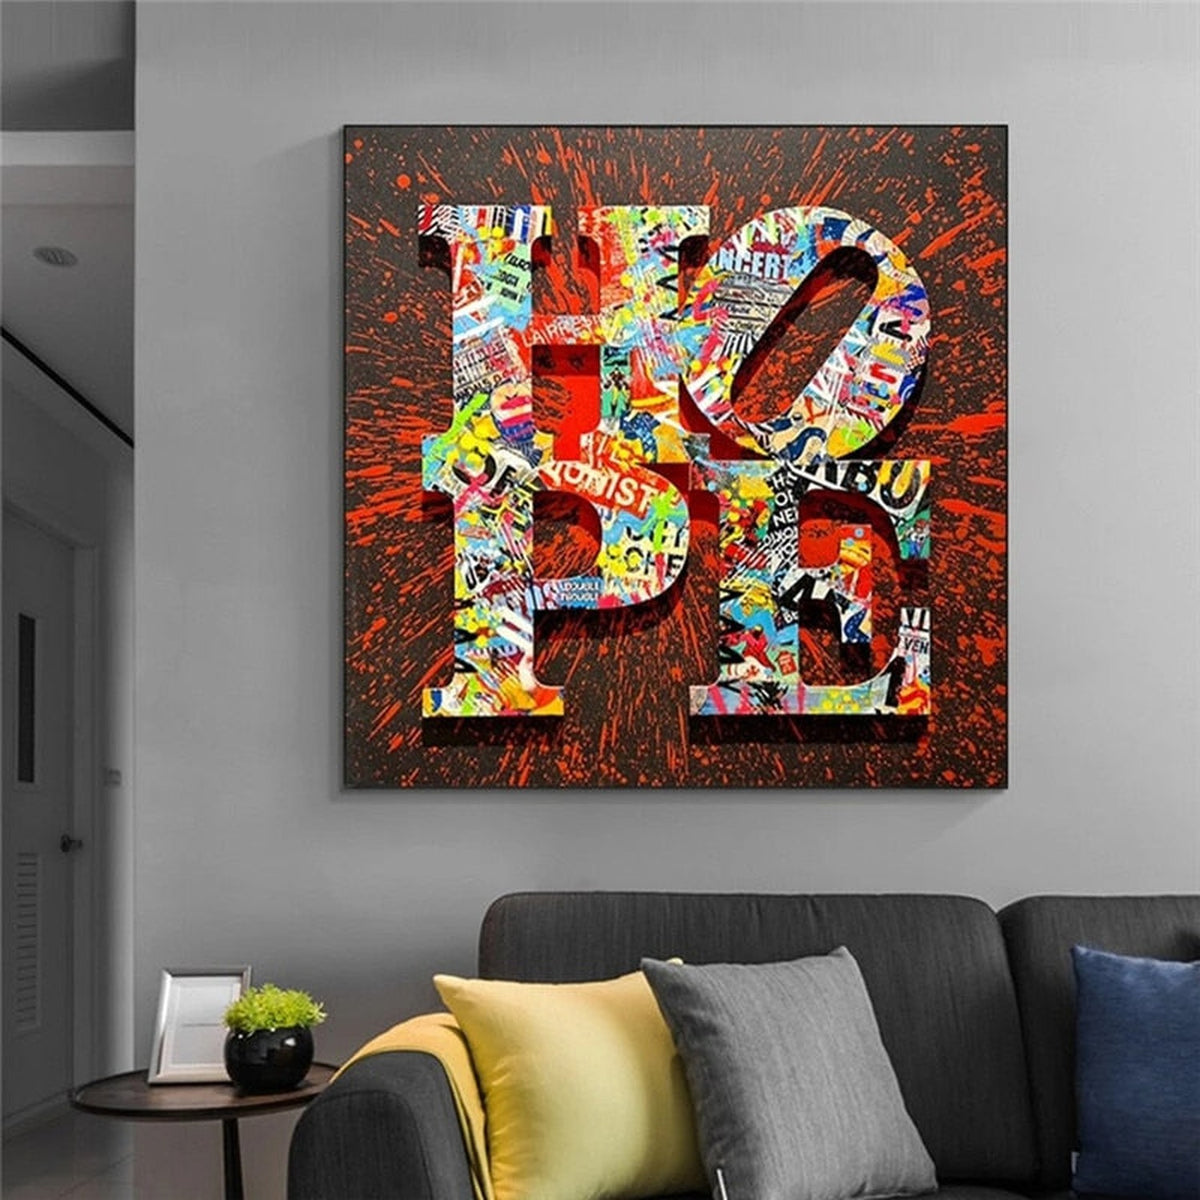 Motivational Artwork Hope Letter Graffiti Art Paintings Print on Canvas Modern Street Art Posters and Prints Home Decoration